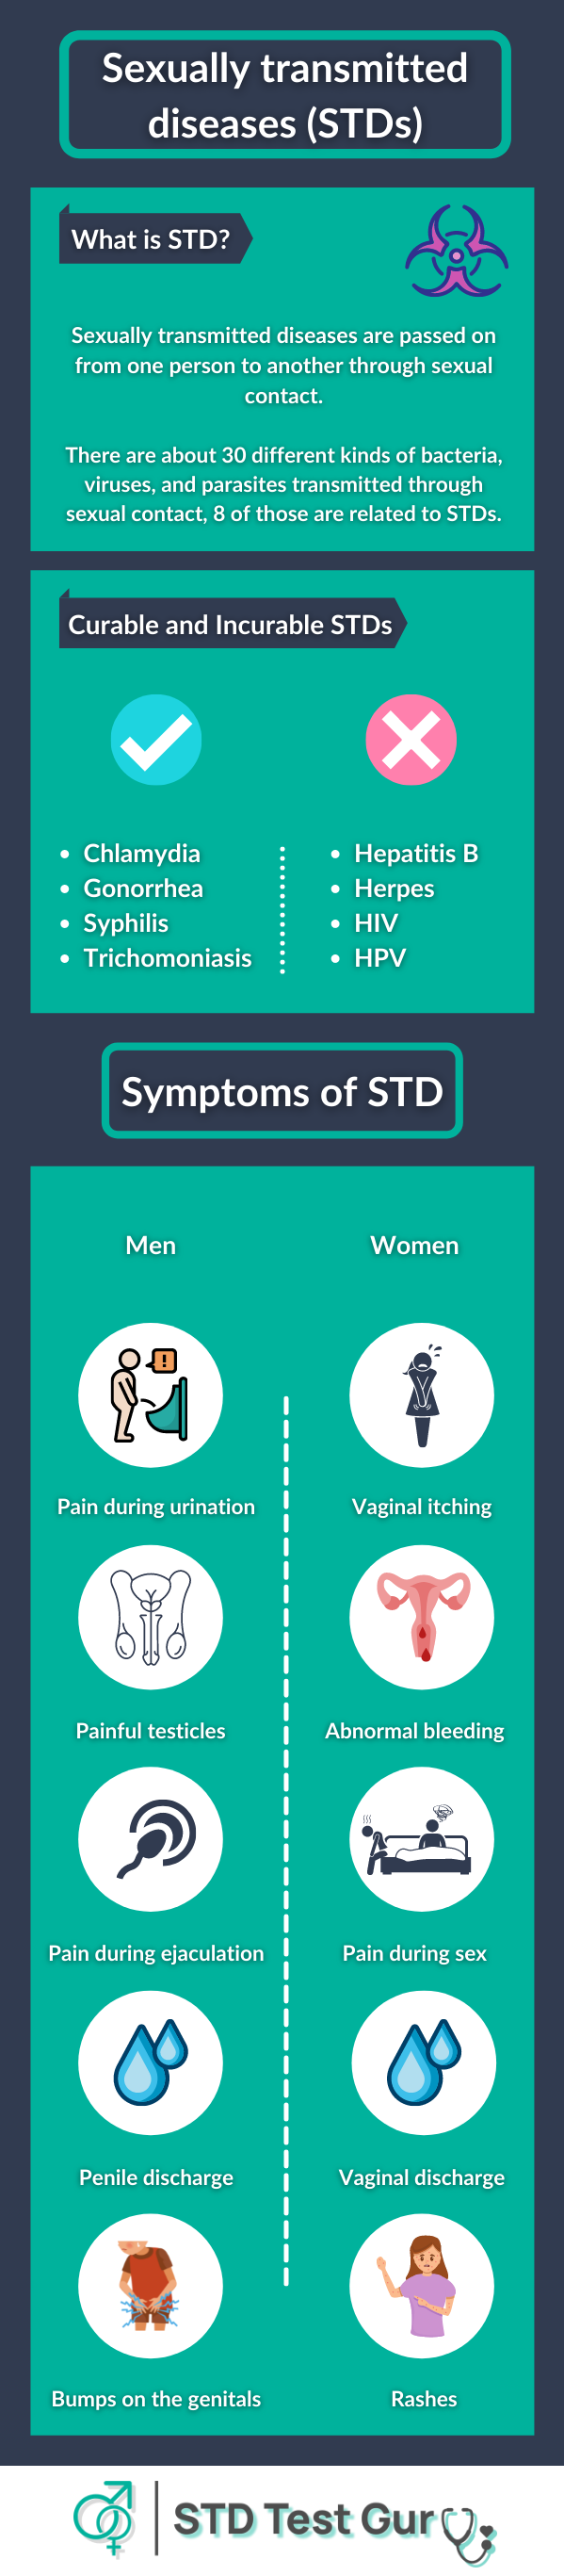 Types of STD and their symptoms